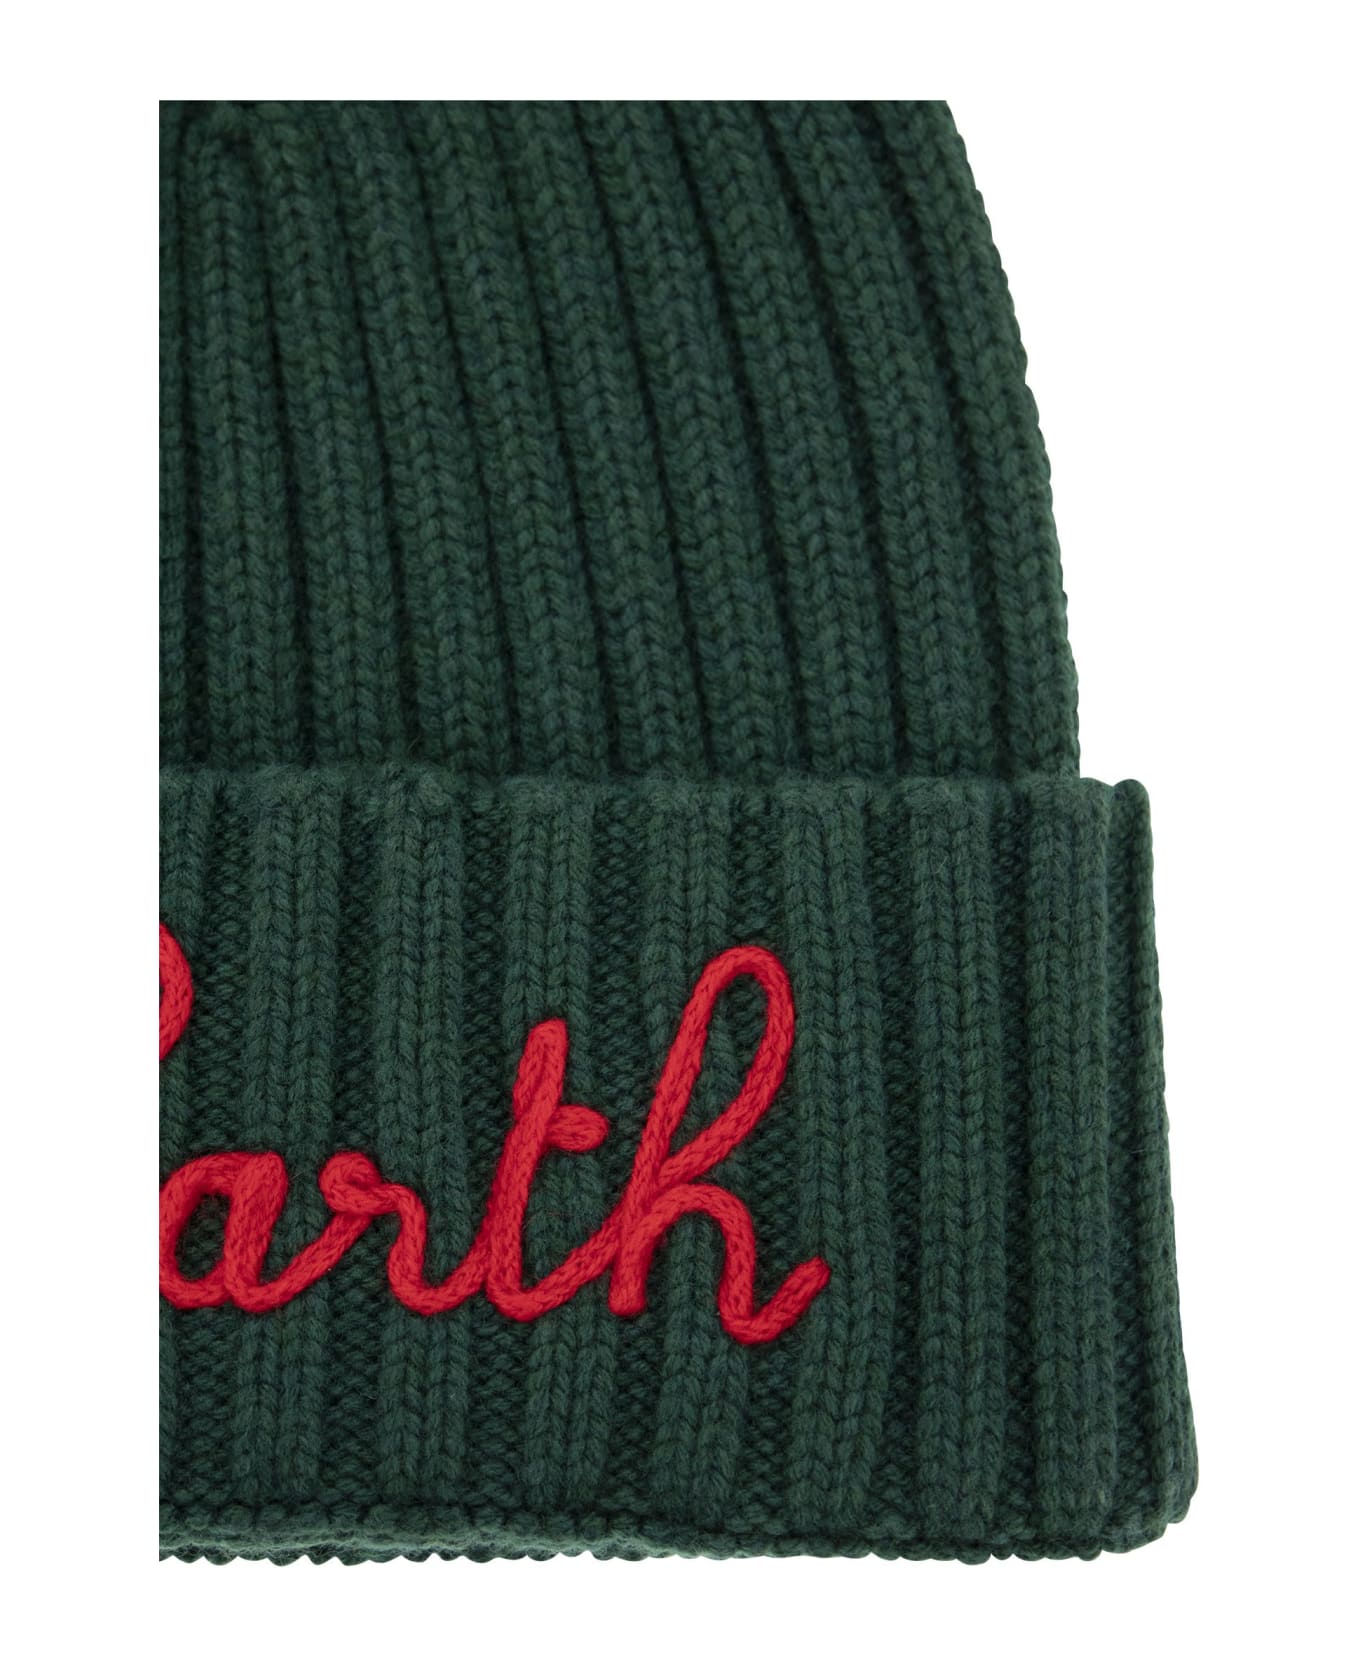 MC2 Saint Barth Wool And Cashmere Blend Hat With Embroidery - Green